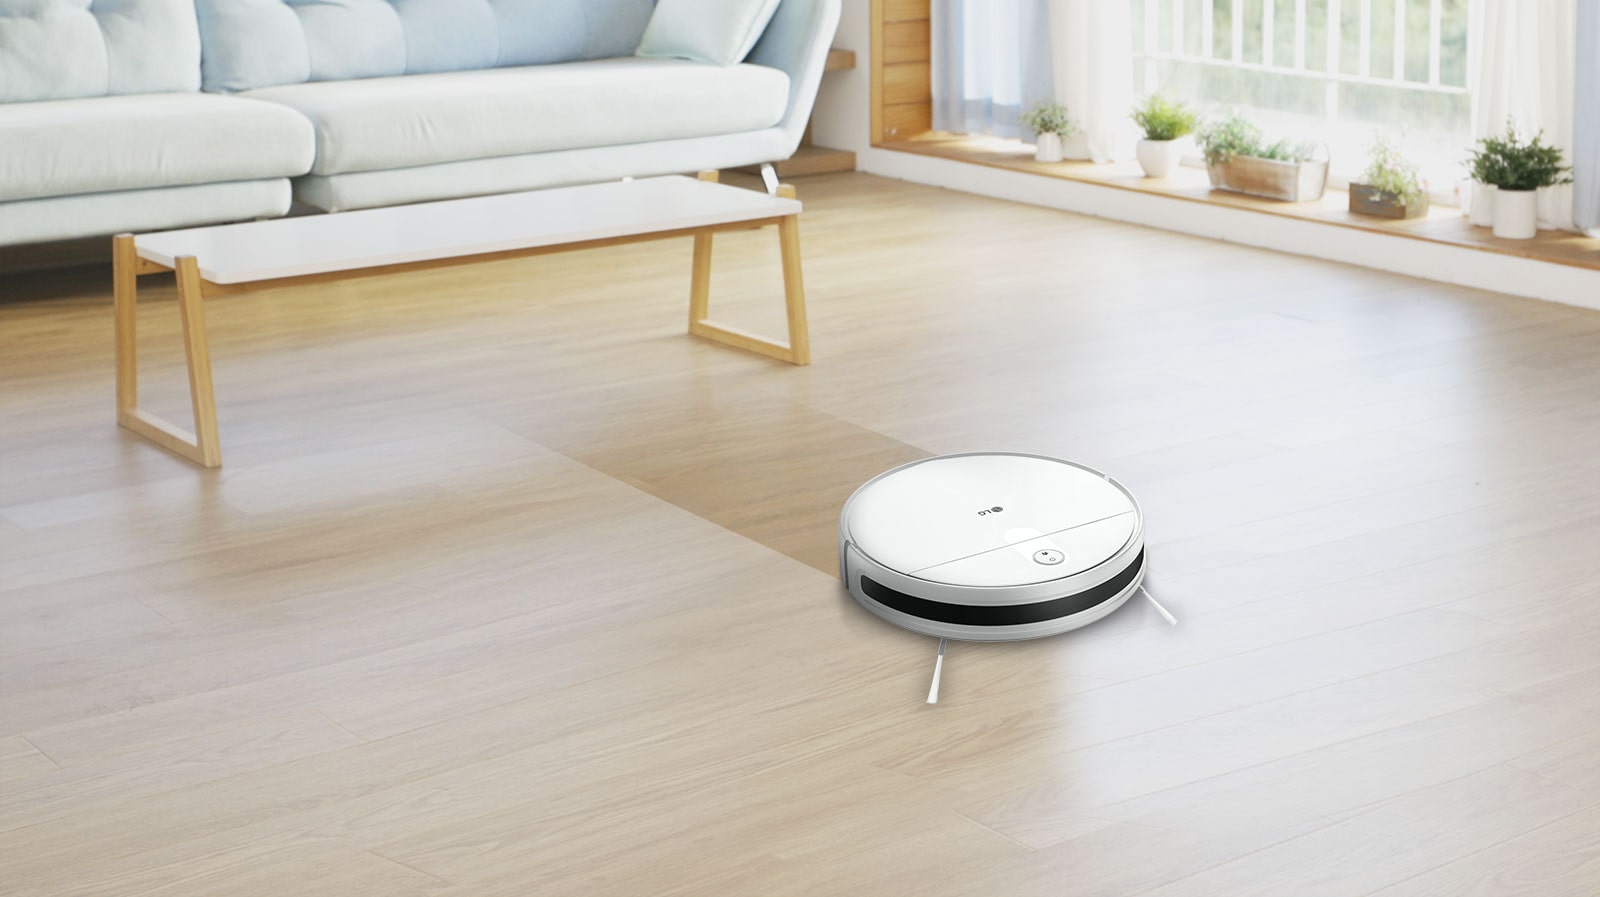 Vacuum and mop functions operate simultaneously, helping you save time. 1